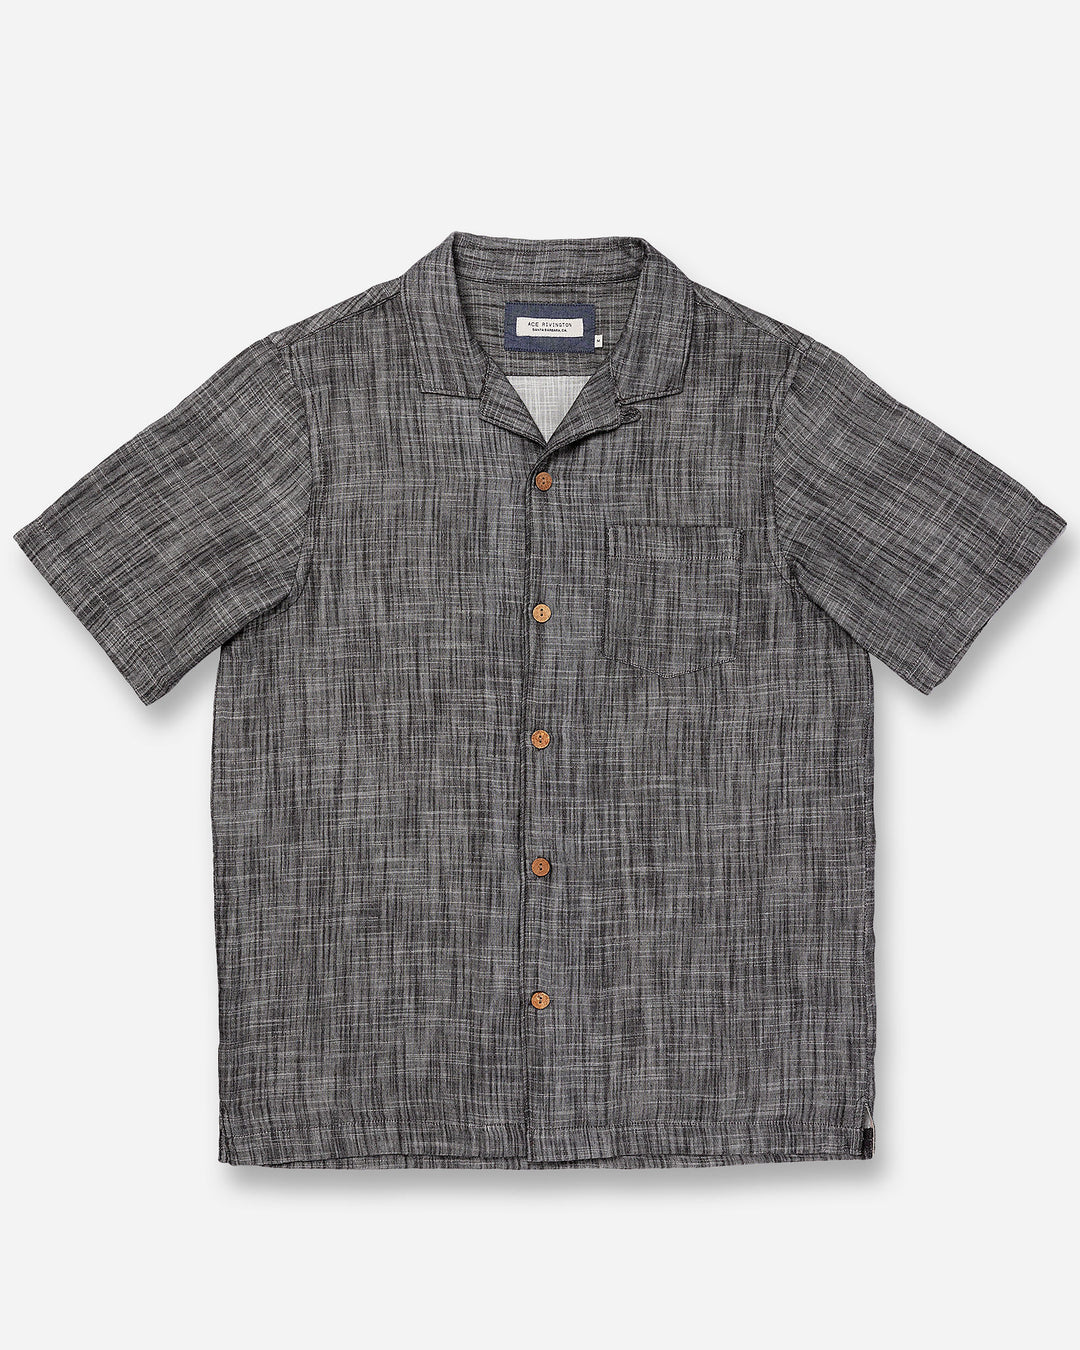 Flat lay of front of Ace Rivington "Black" Double gauze soft-textured cotton fabric camp collar shirt with coconut buttons and left-breast pocket